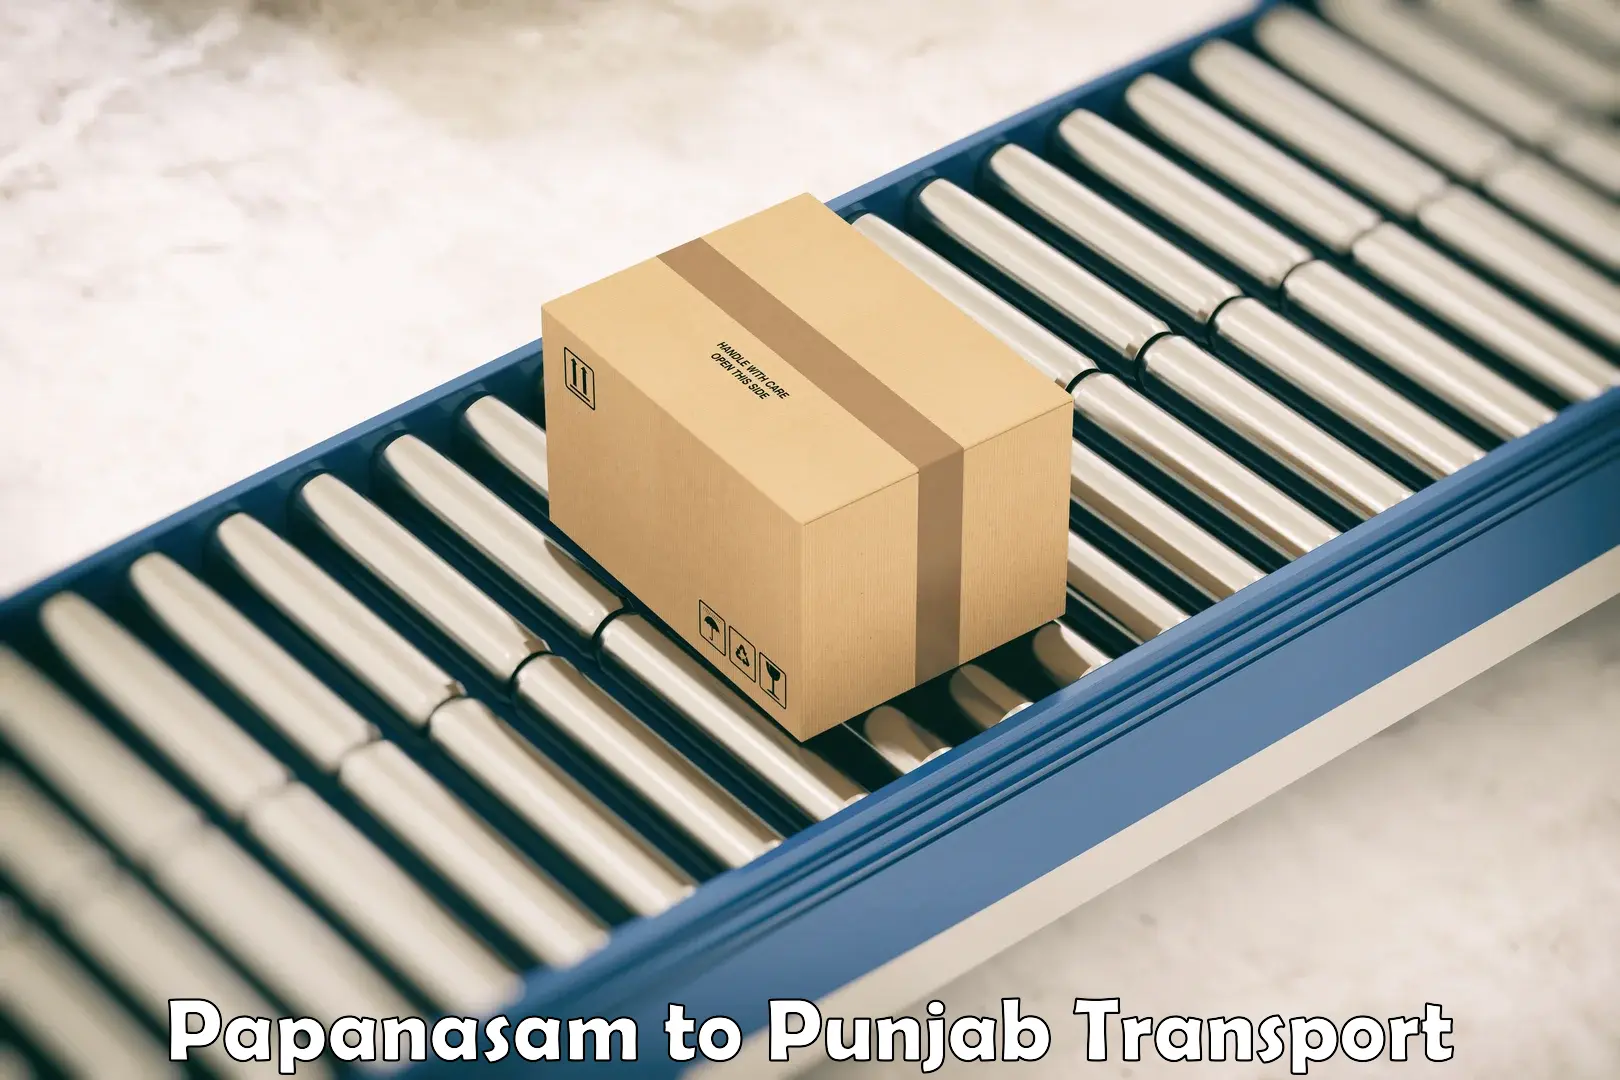 Air freight transport services Papanasam to Punjab